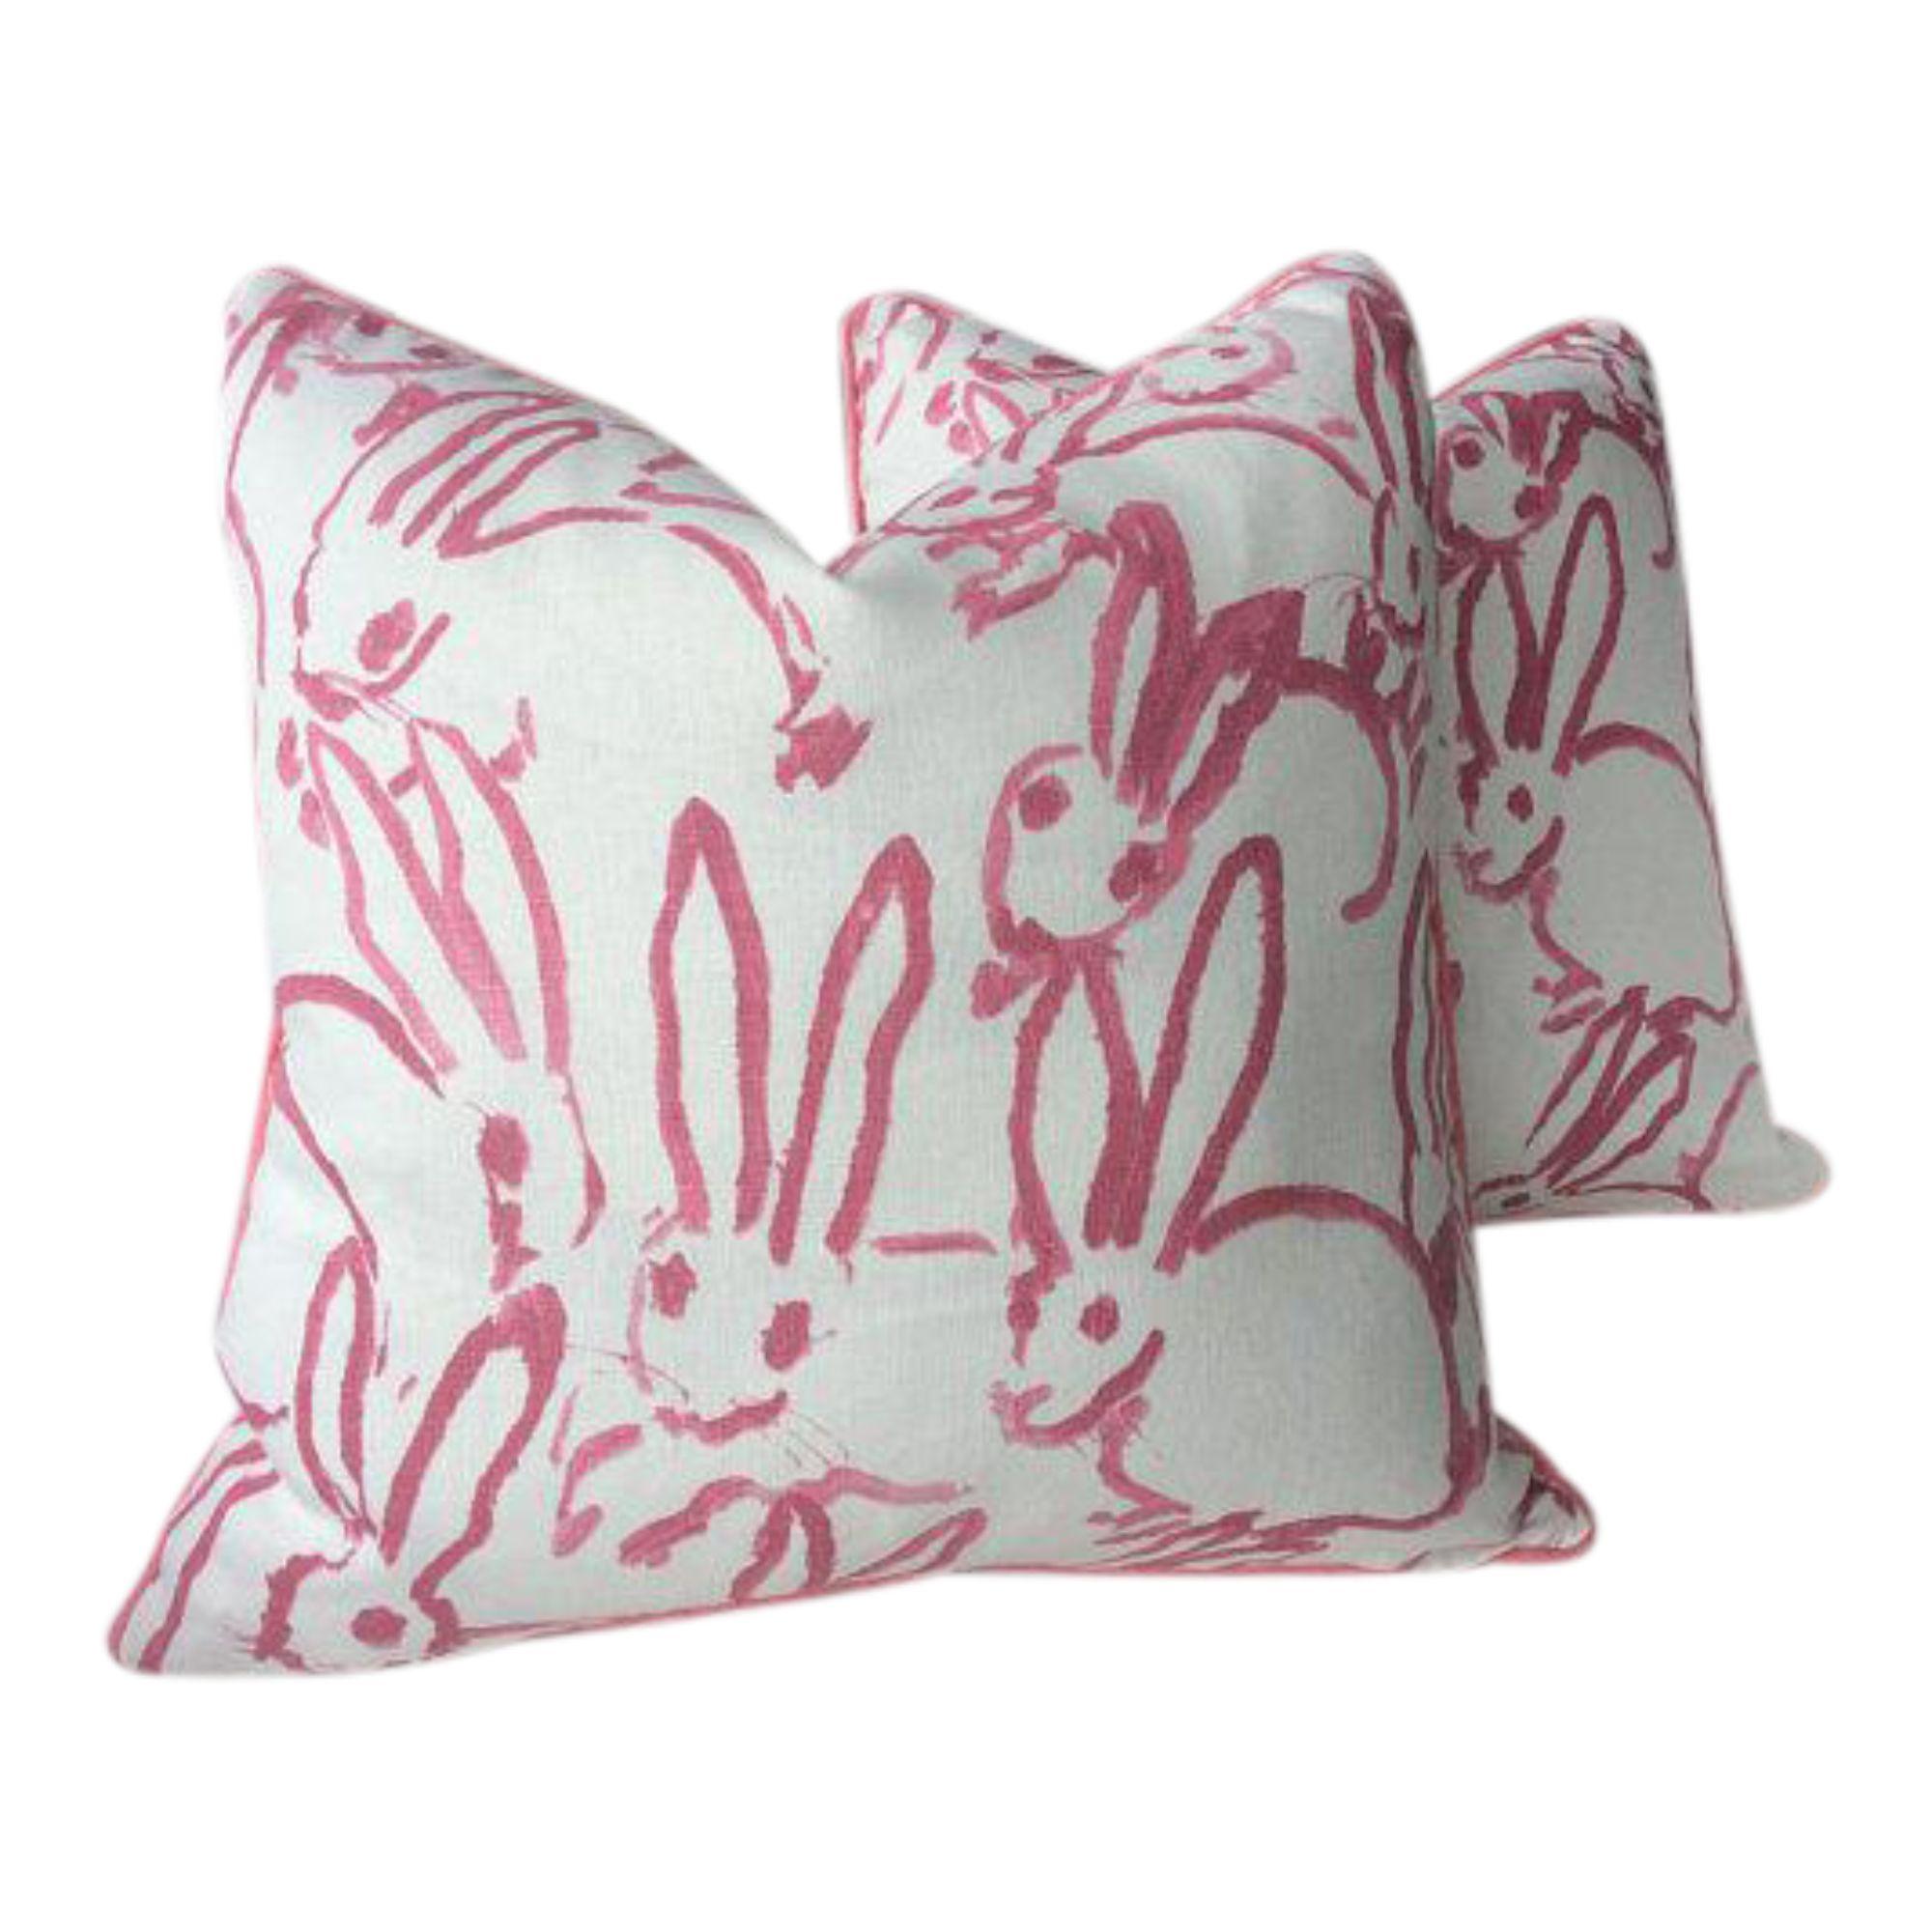 Pink Lee Jofa Hunt Slonen Bunny Hutch Pillows - A Pair For Sale